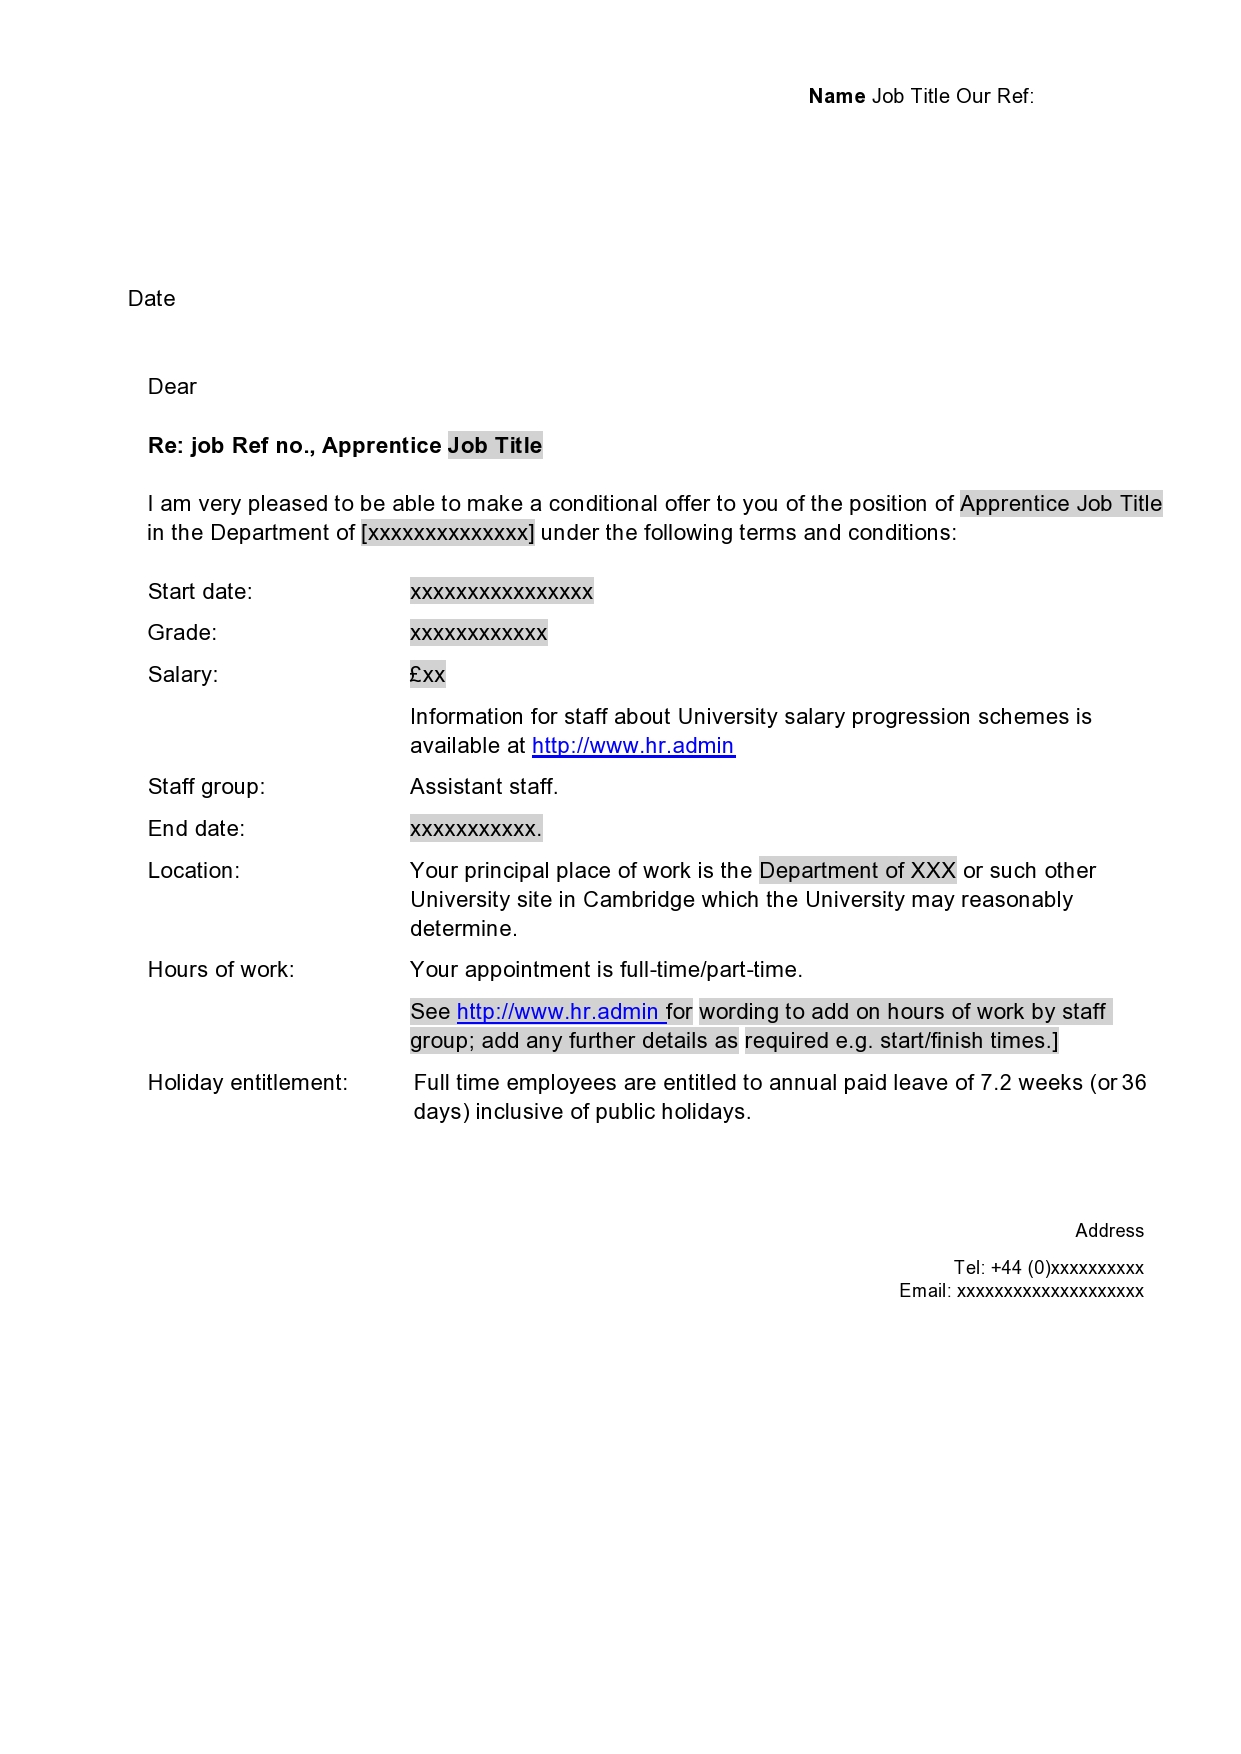 Free employment offer letter template 34